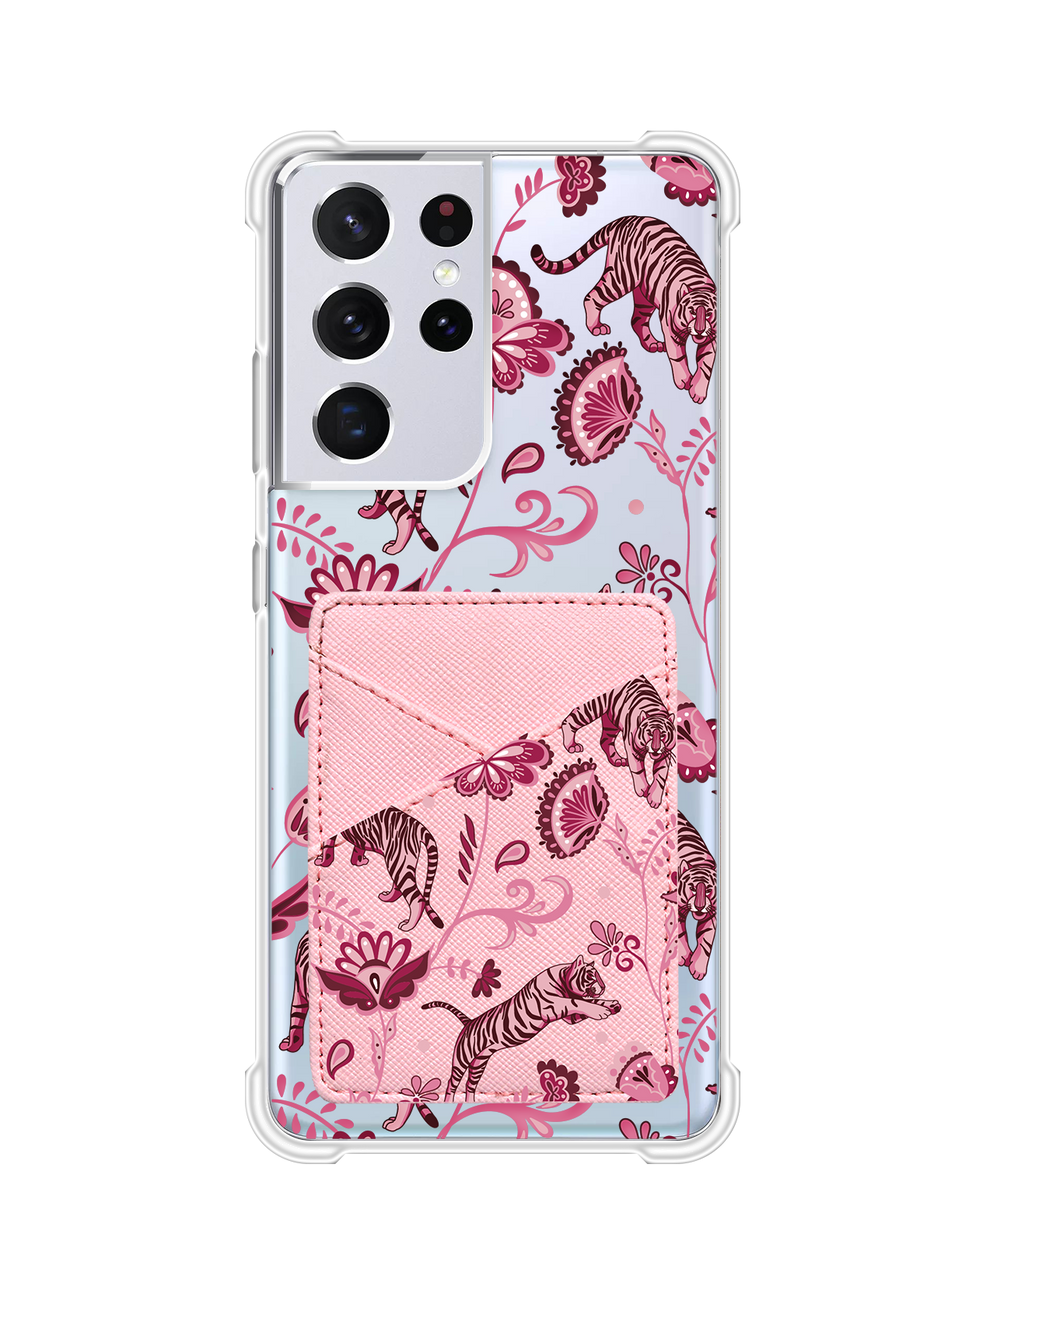 Android Phone Wallet Case - Tiger & Floral 2.0